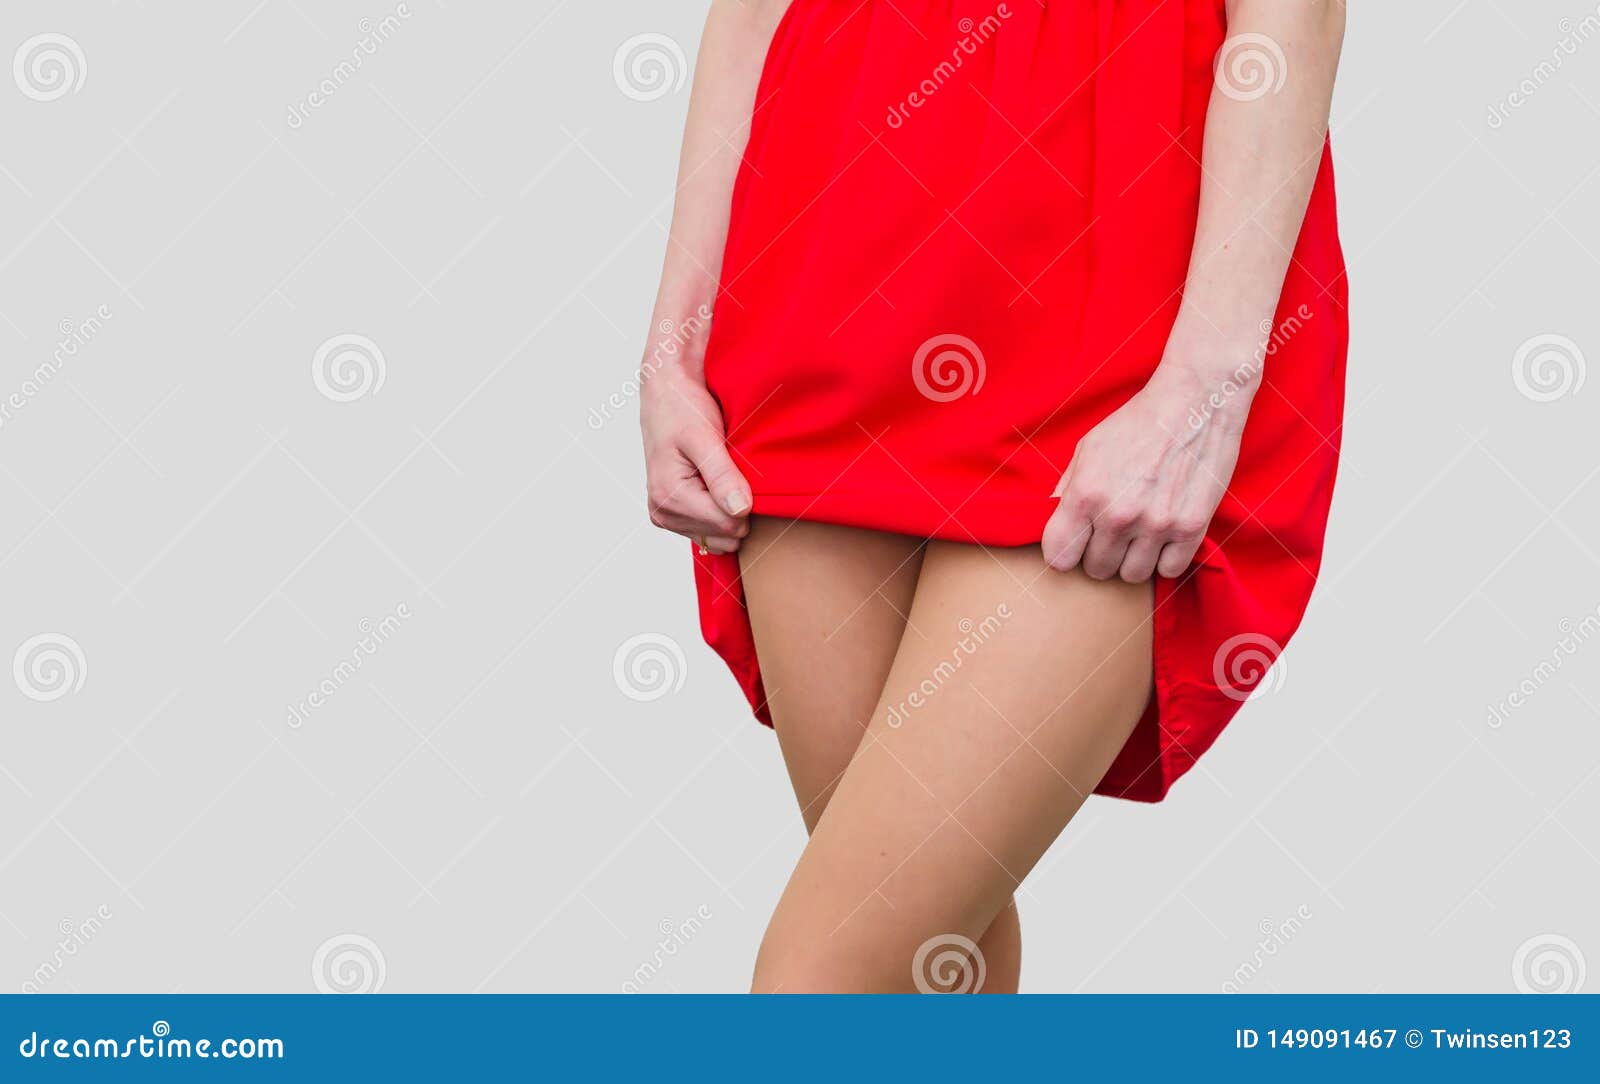 Girl in the Red Dress Lifts the Hem, Show Legs picture